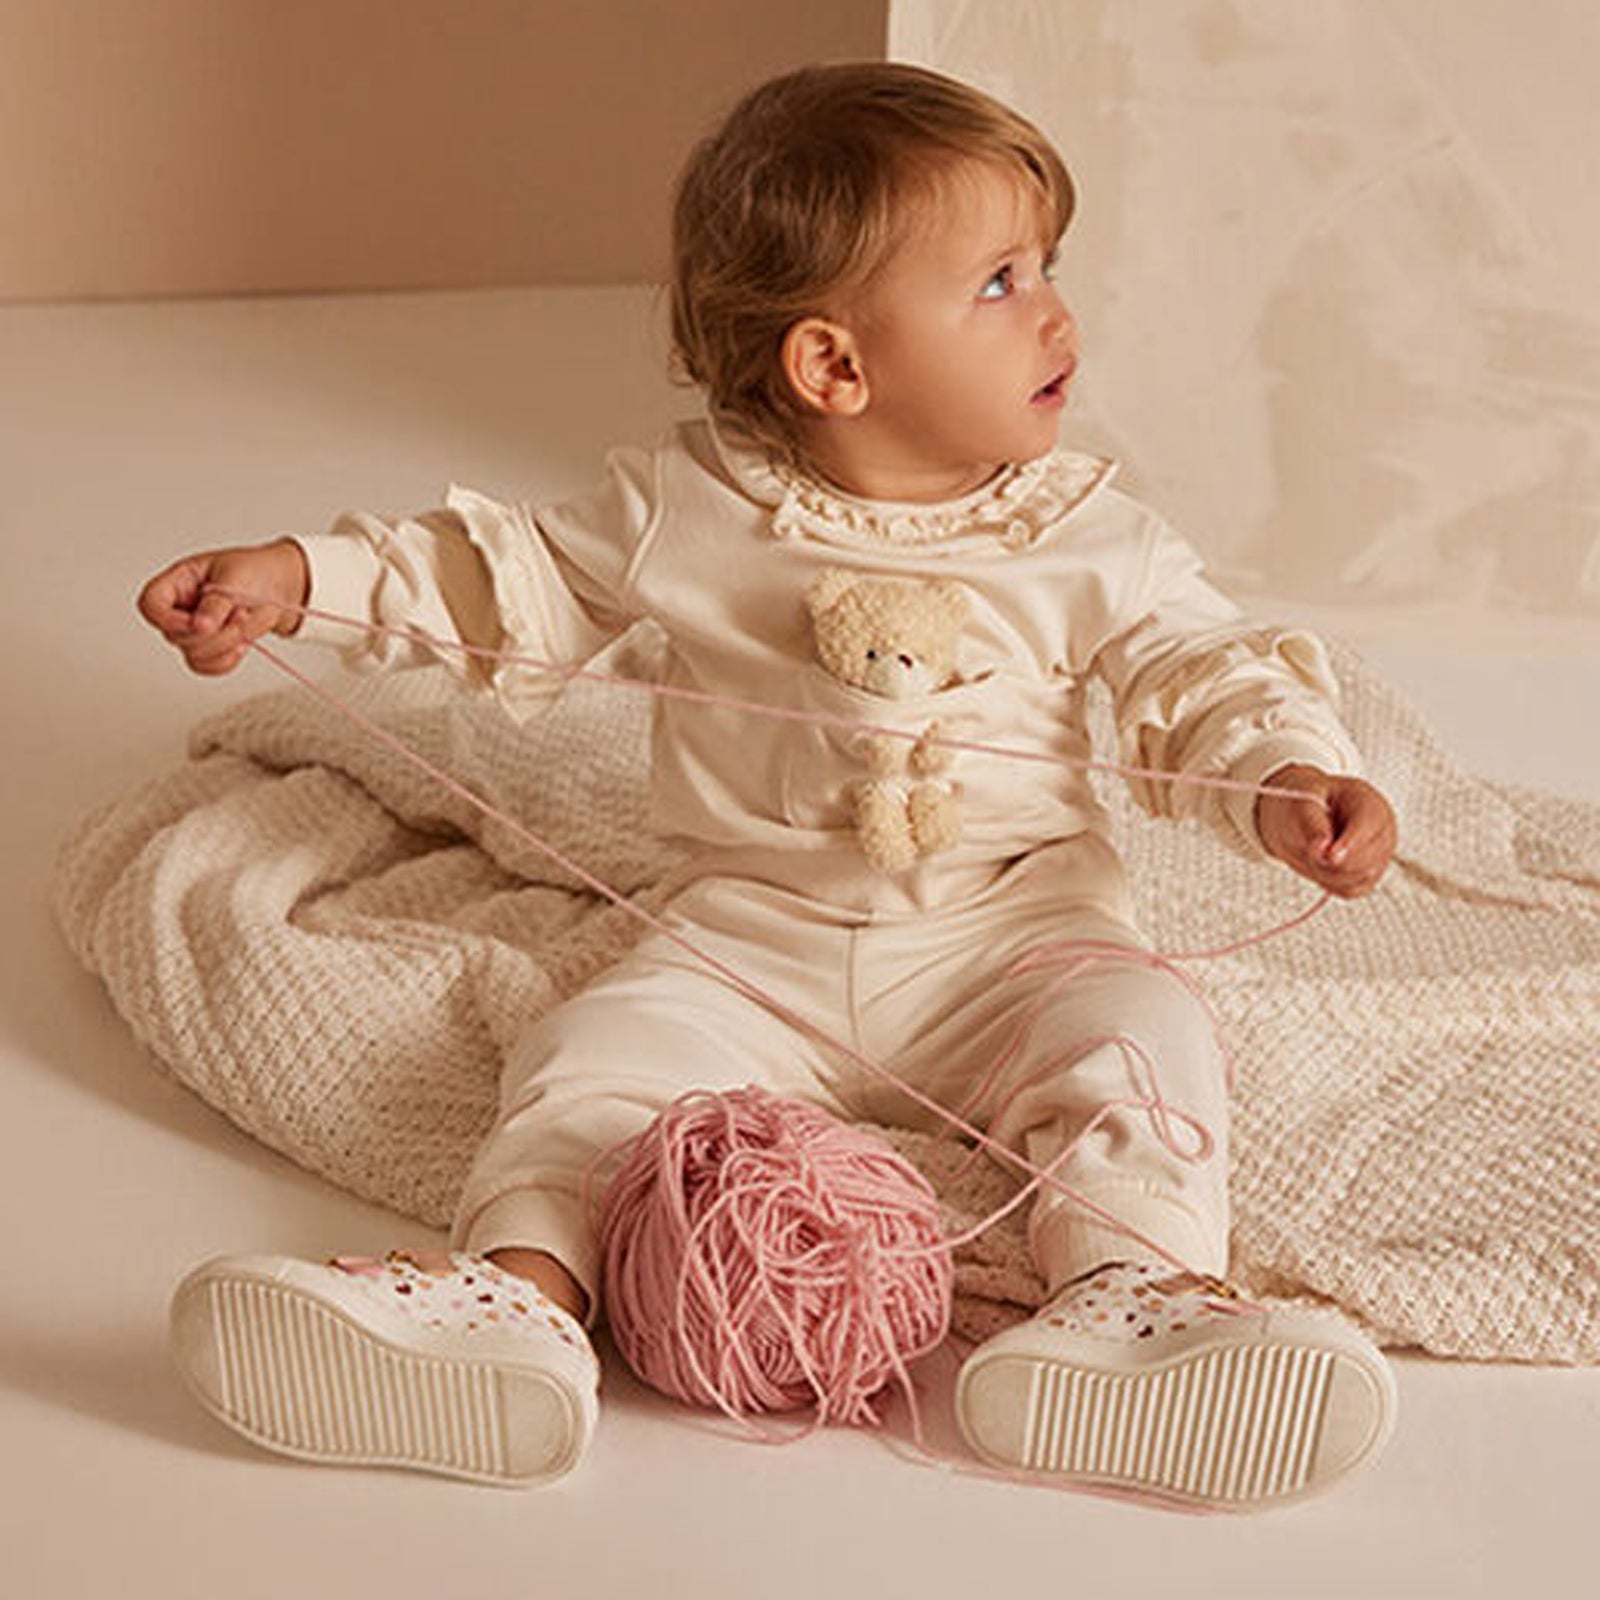 Designer clothes for children and babies